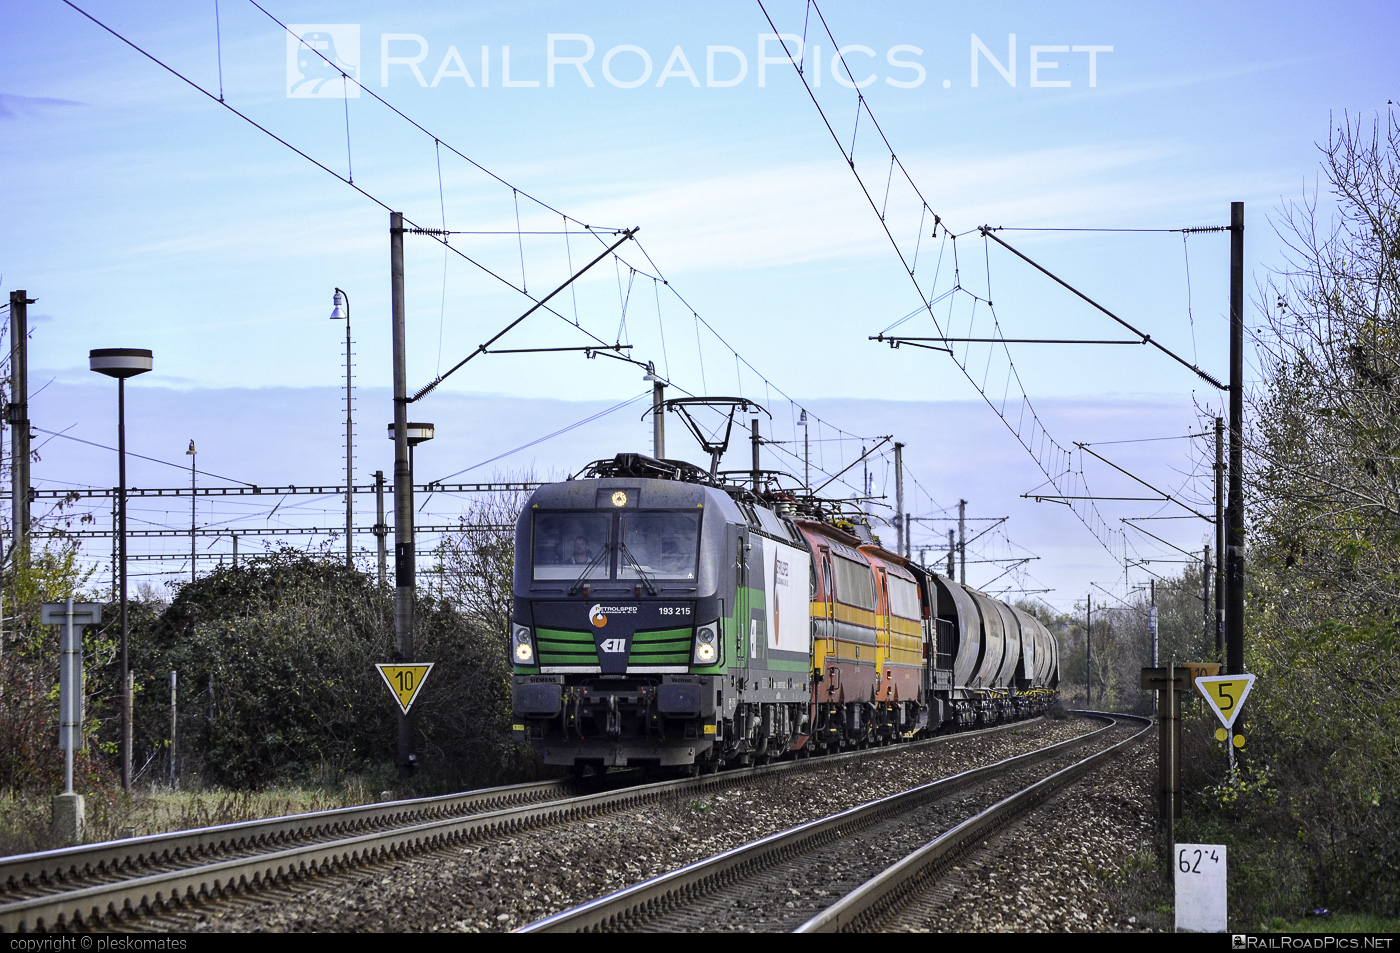 Siemens Vectron MS - 193 215 operated by PETROLSPED Slovakia s.r.o. #ell #ellgermany #eloc #europeanlocomotiveleasing #hopperwagon #petrolsped #siemens #siemensvectron #siemensvectronms #transcereales #vectron #vectronms